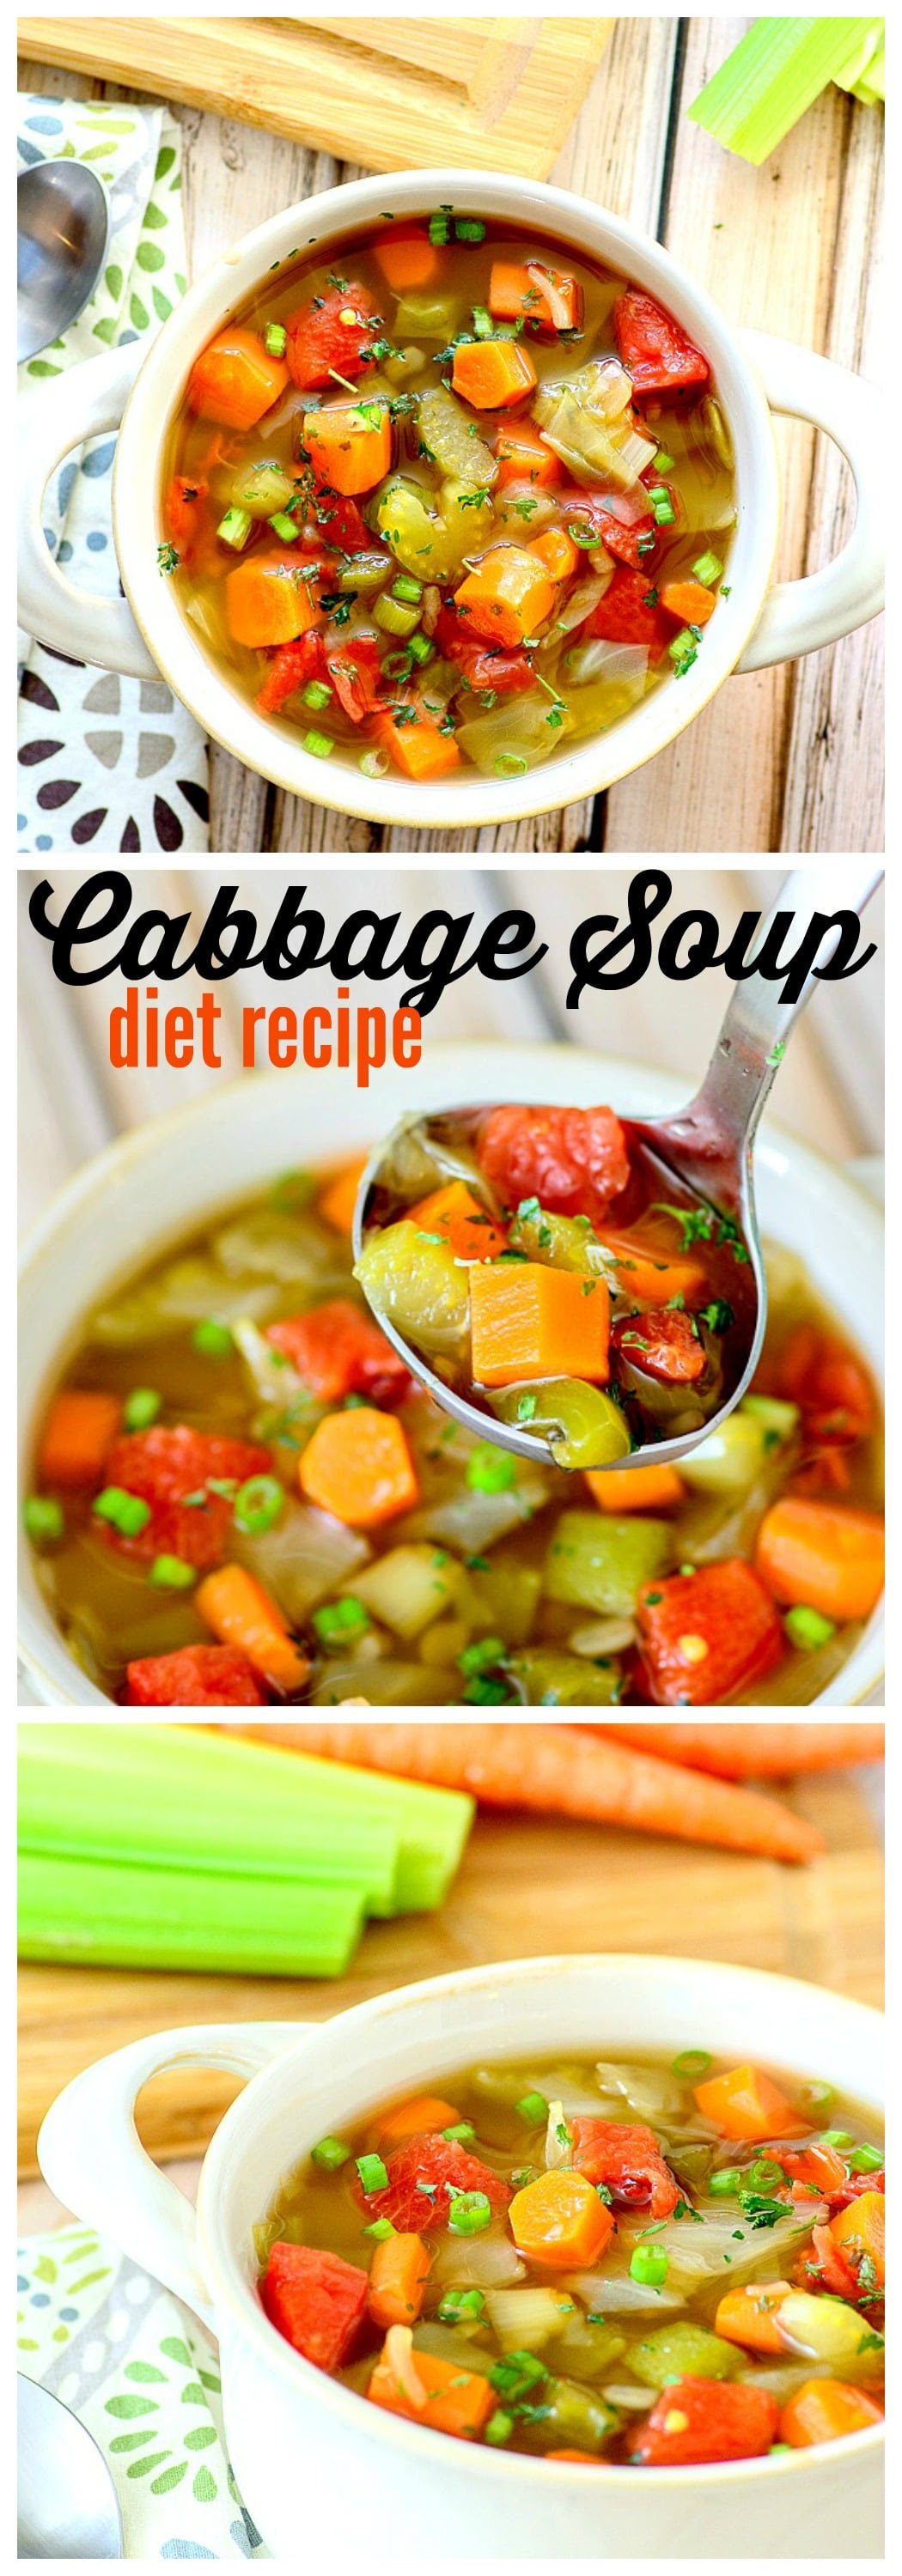 Cabbage soup diet recipe 7 day plan questions and answers - Cabbage ...